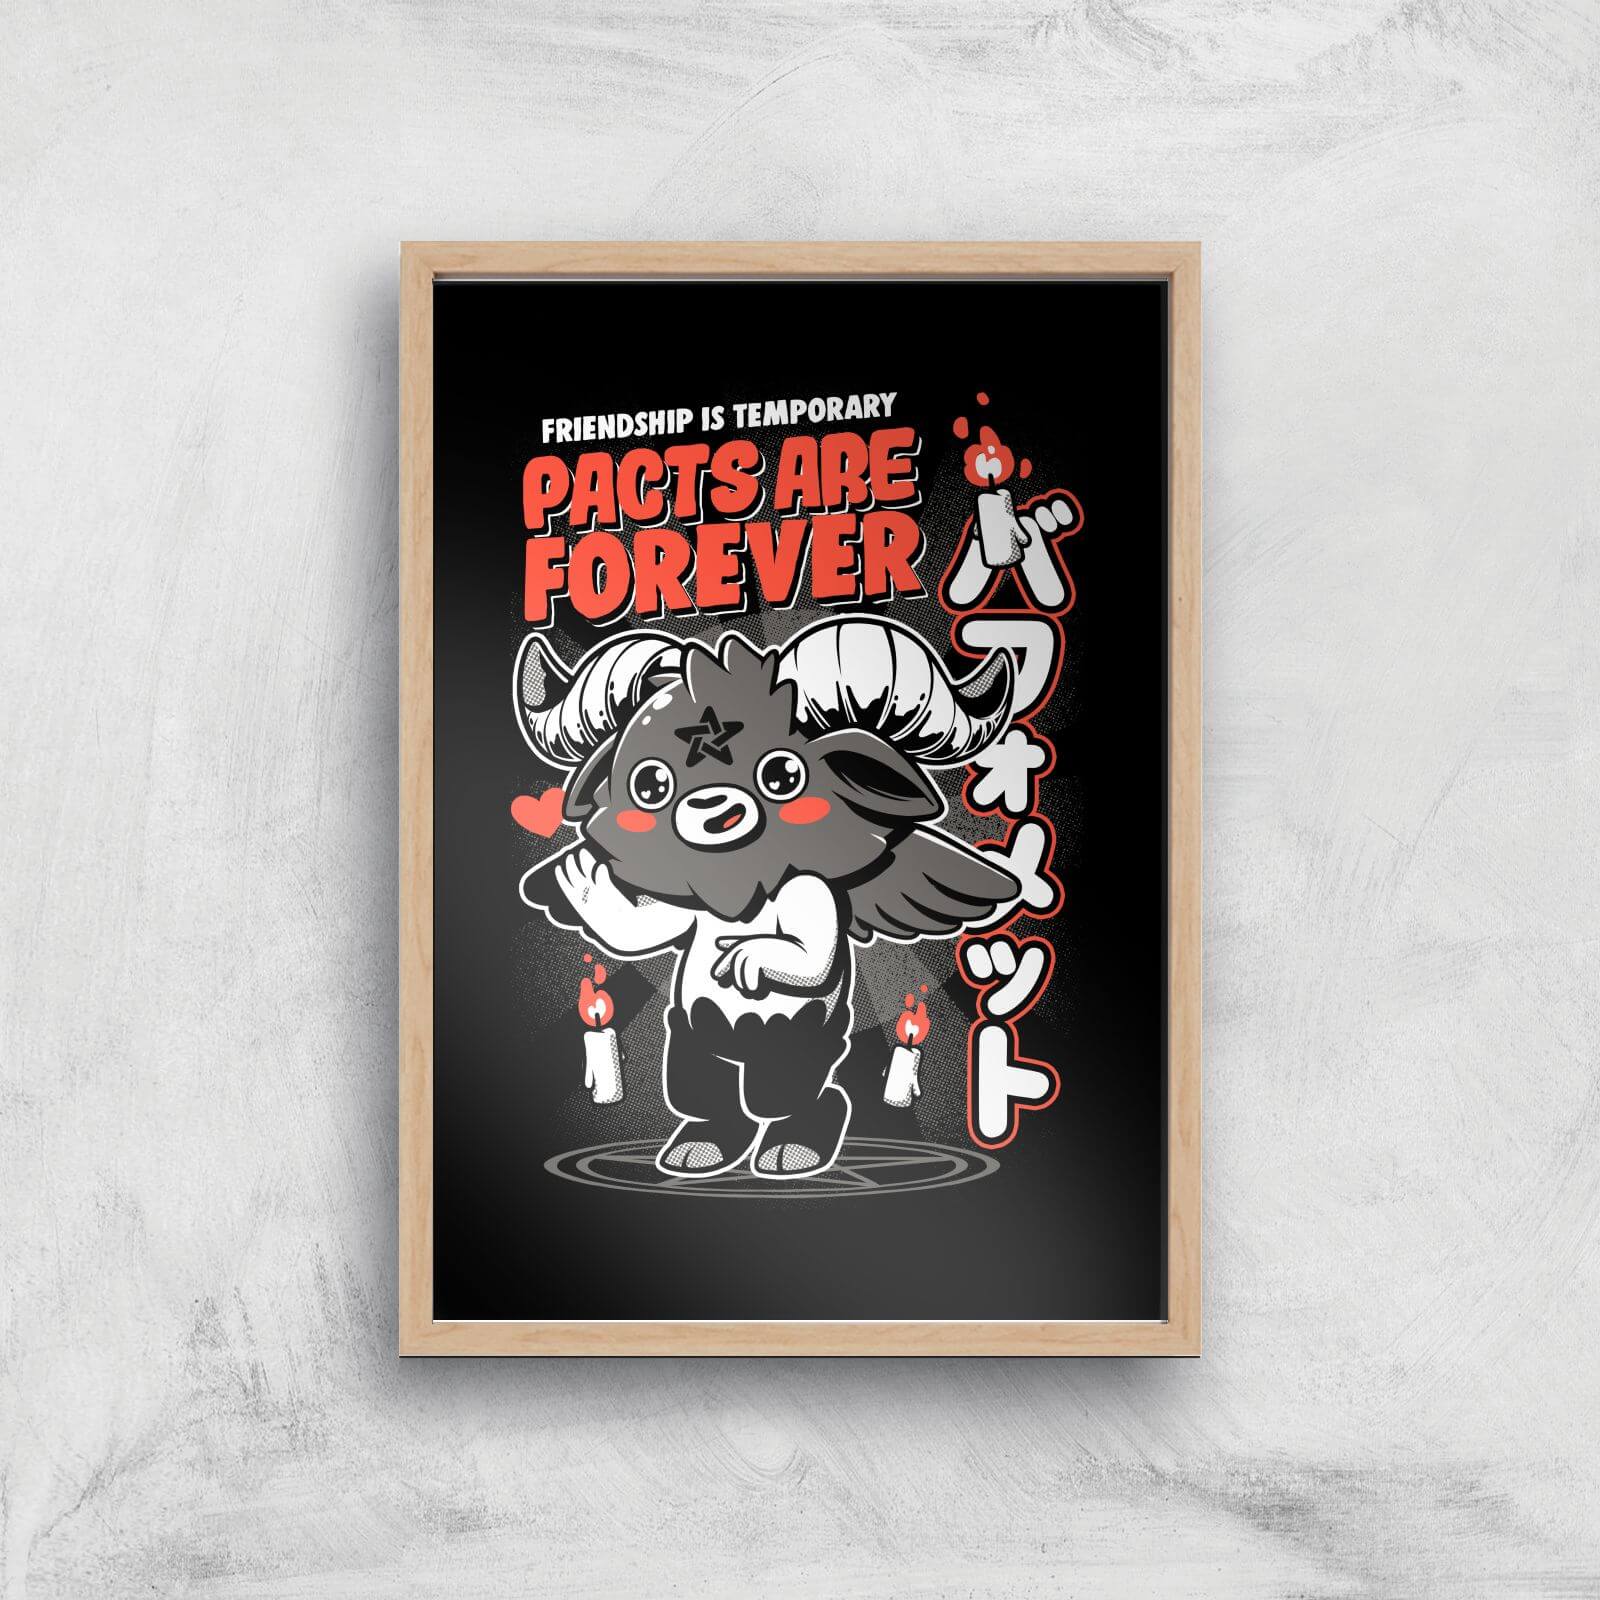 Ilustrata Pacts Are Forever Giclee Art Print - A4 - Wooden Frame